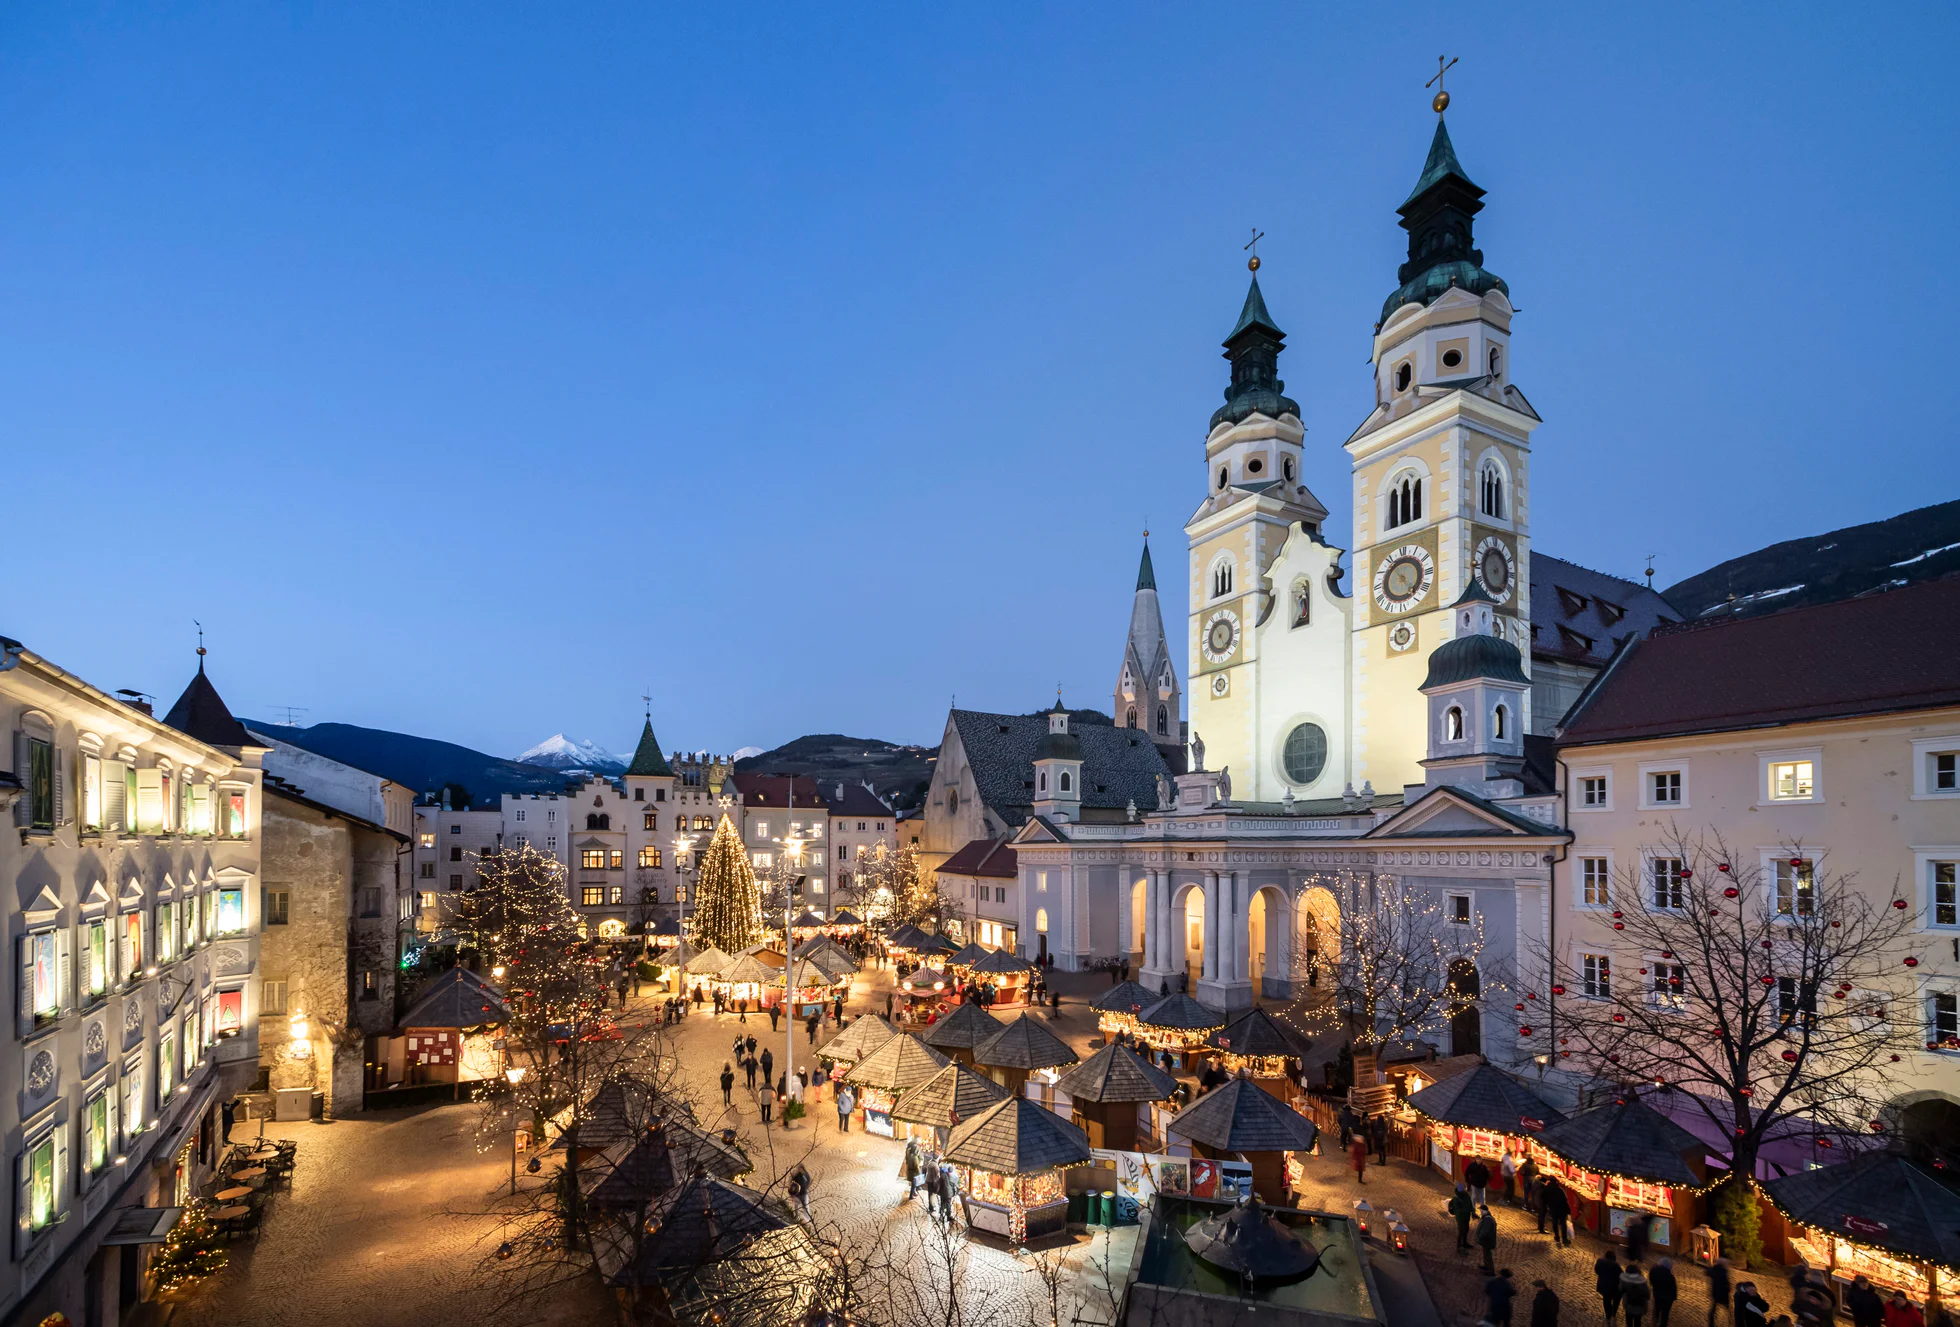 The festively lit Christmas market in the centre of Brixen/Bressanone